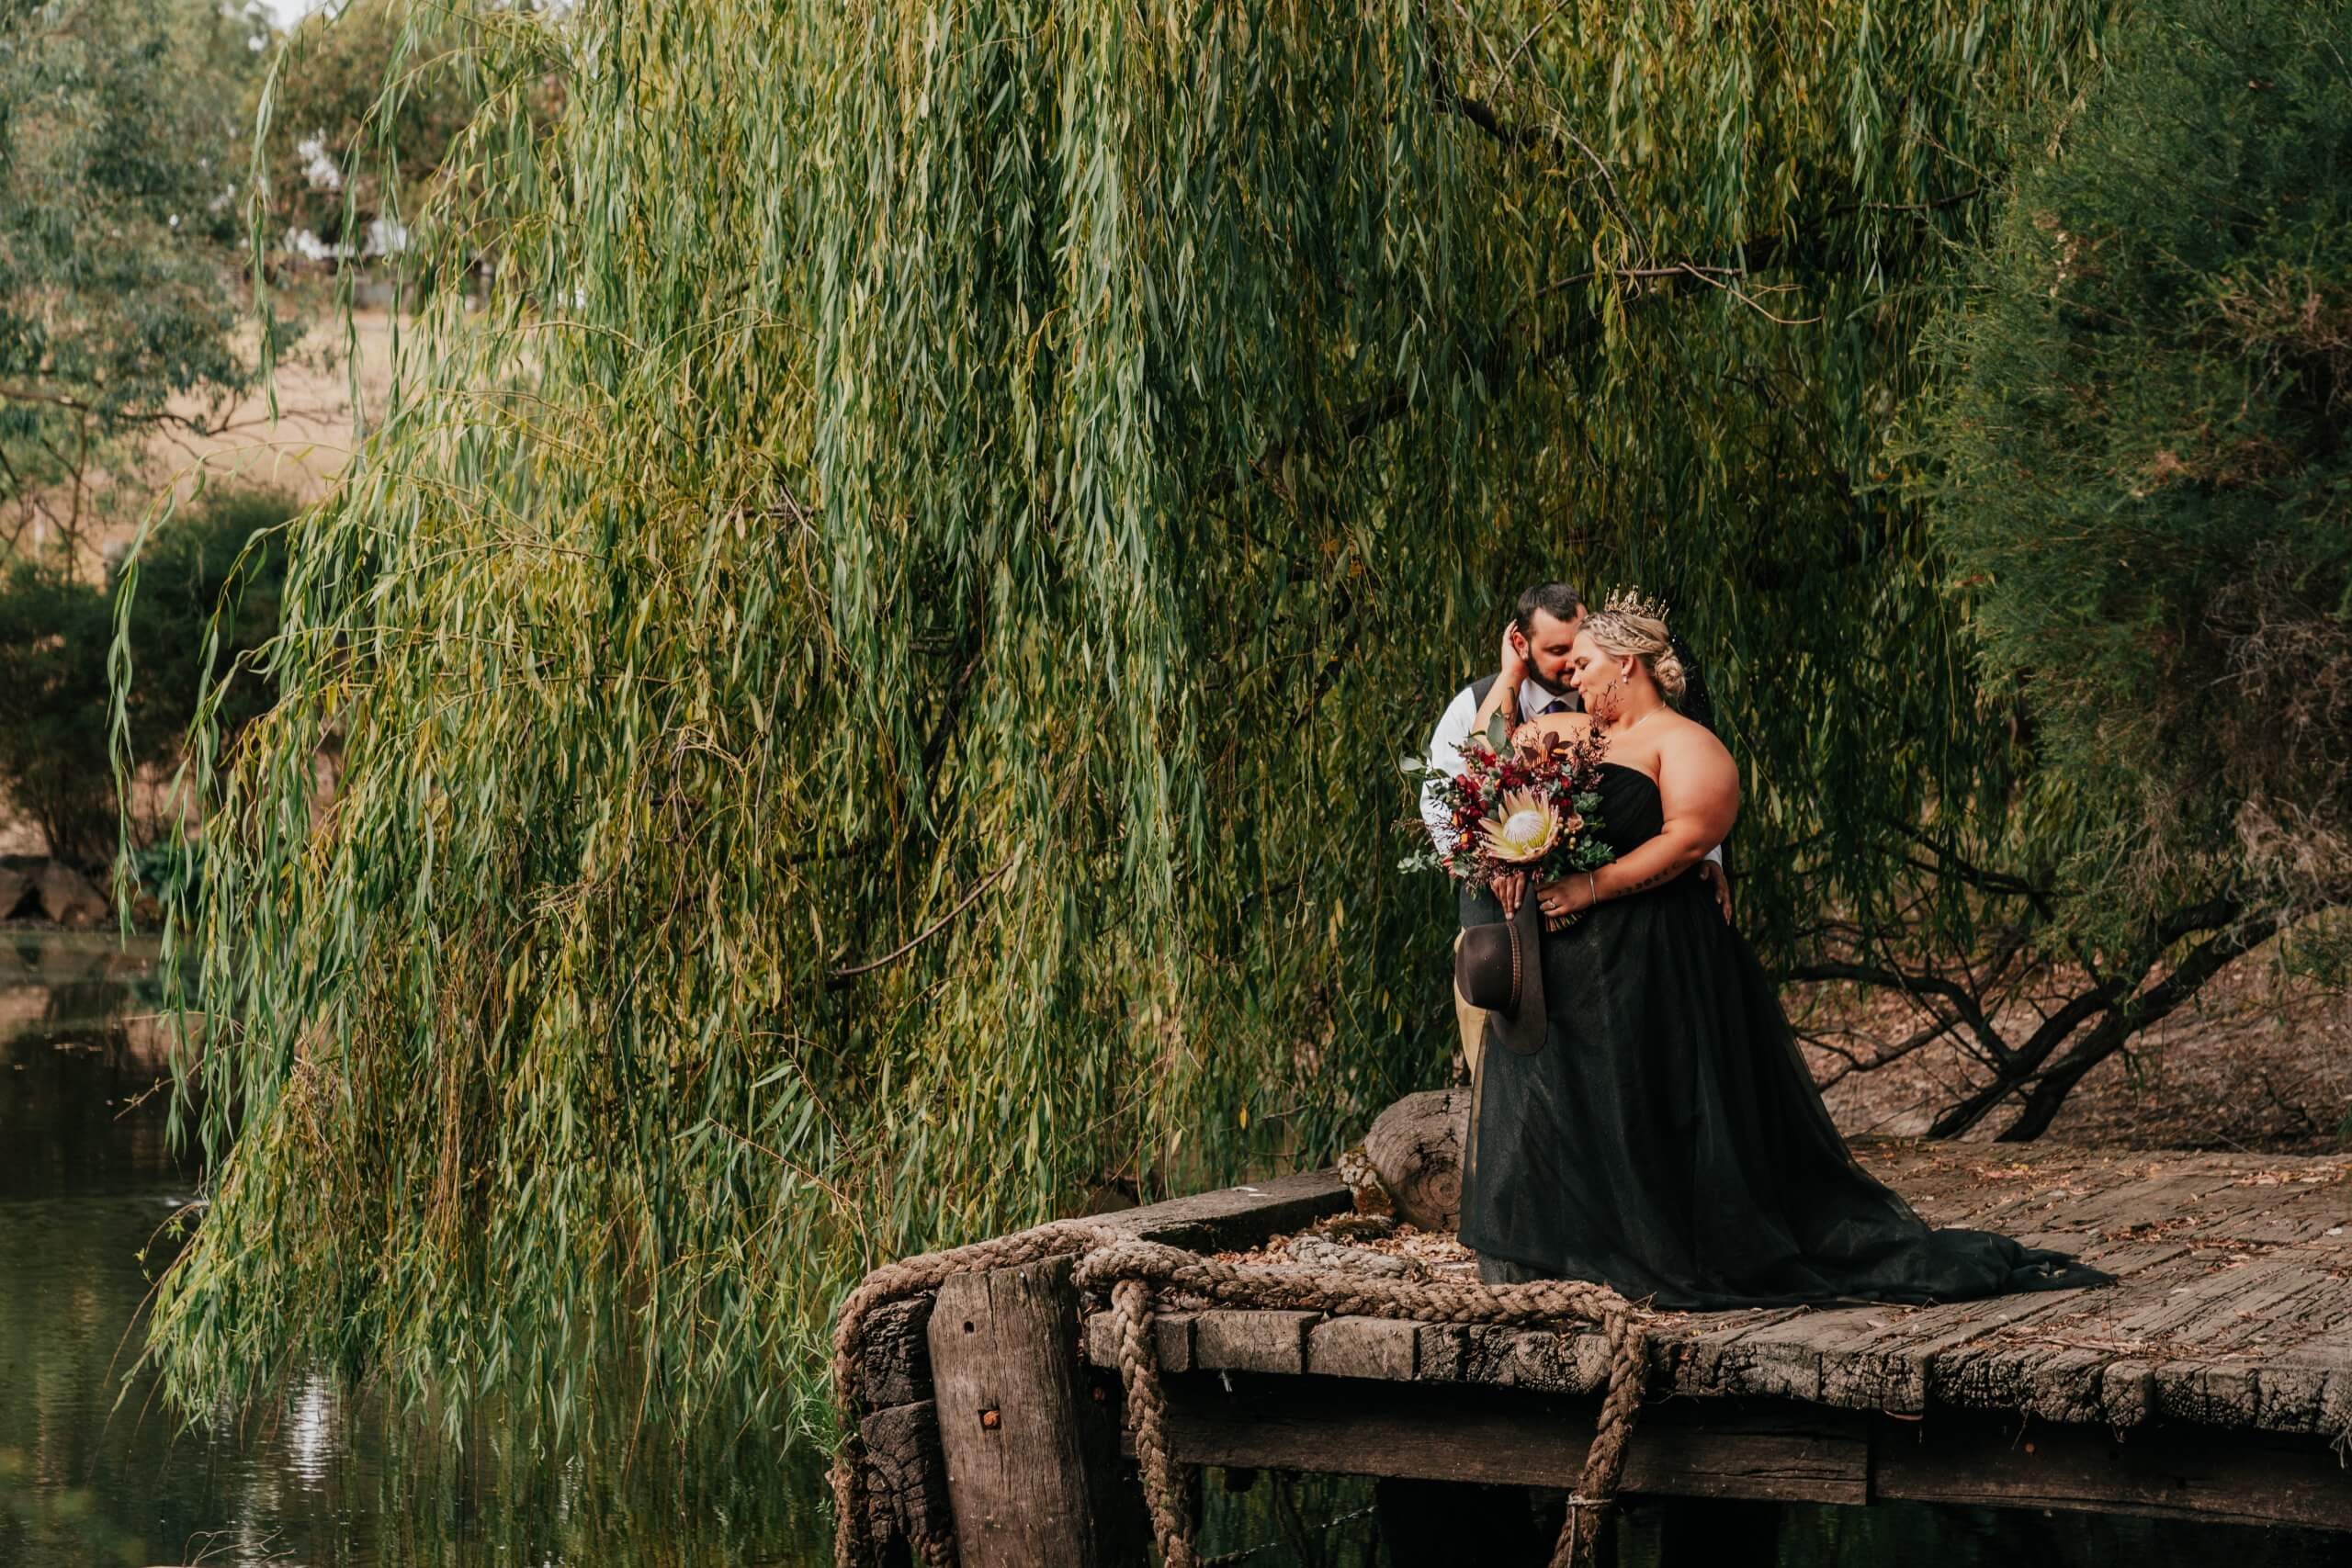 The bride, wearing a black, unconventional wedding gown and a beautiful tiara is being embraced lovingly in back hug by her husband as they are standing in the docks.